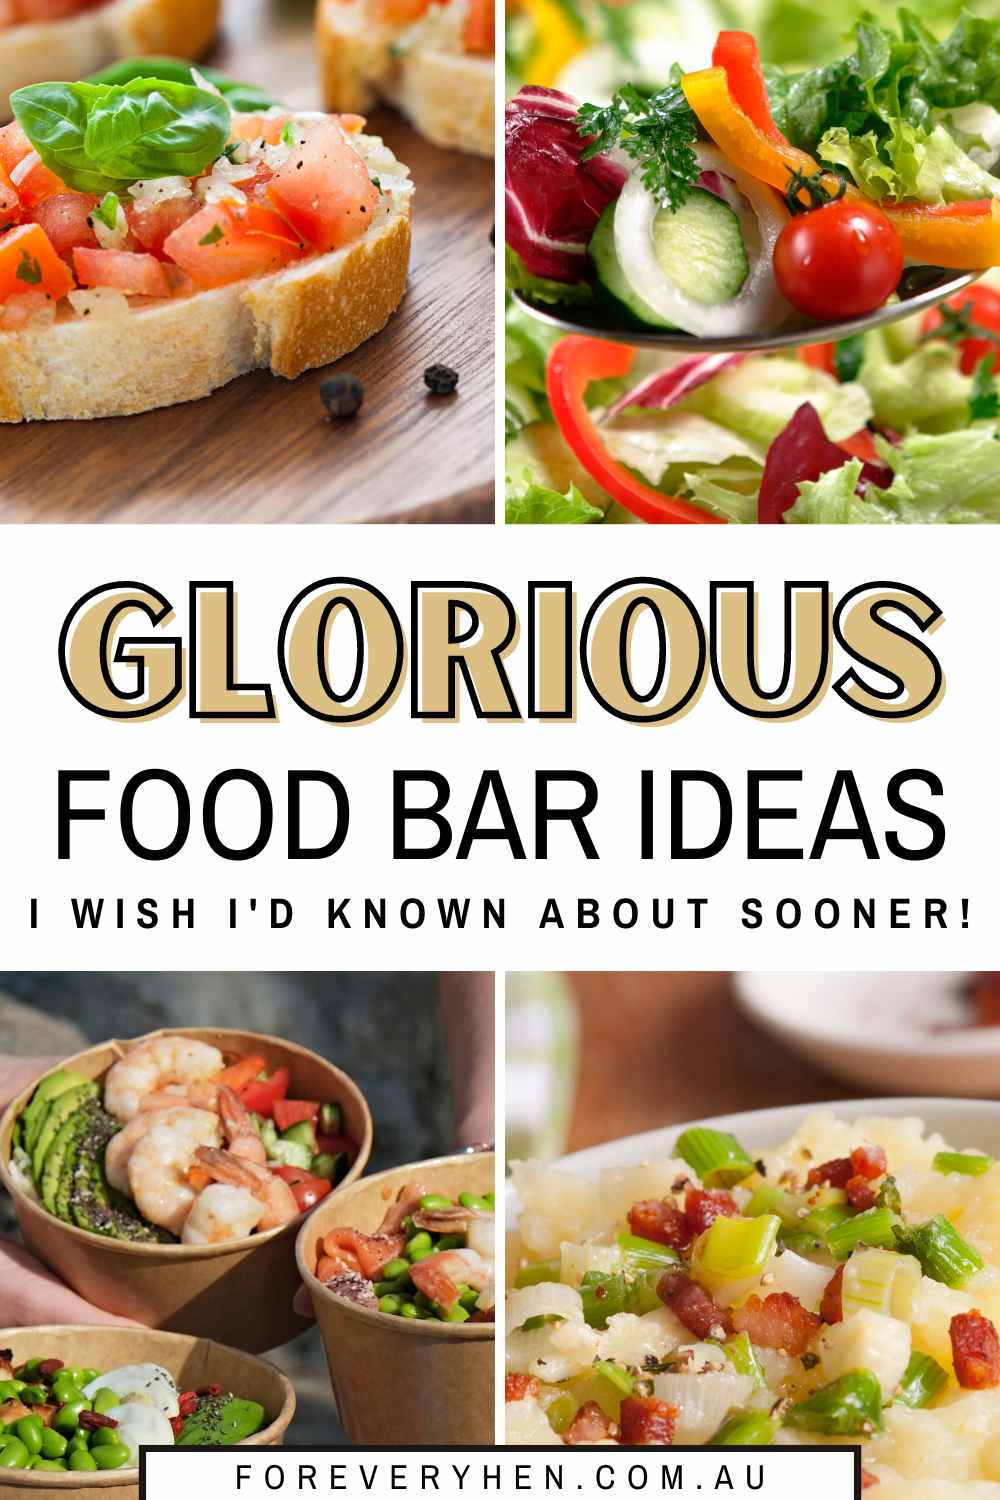 Collage of food images. Text overlay: Glorious food bar ideas I wish I'd known about sooner!